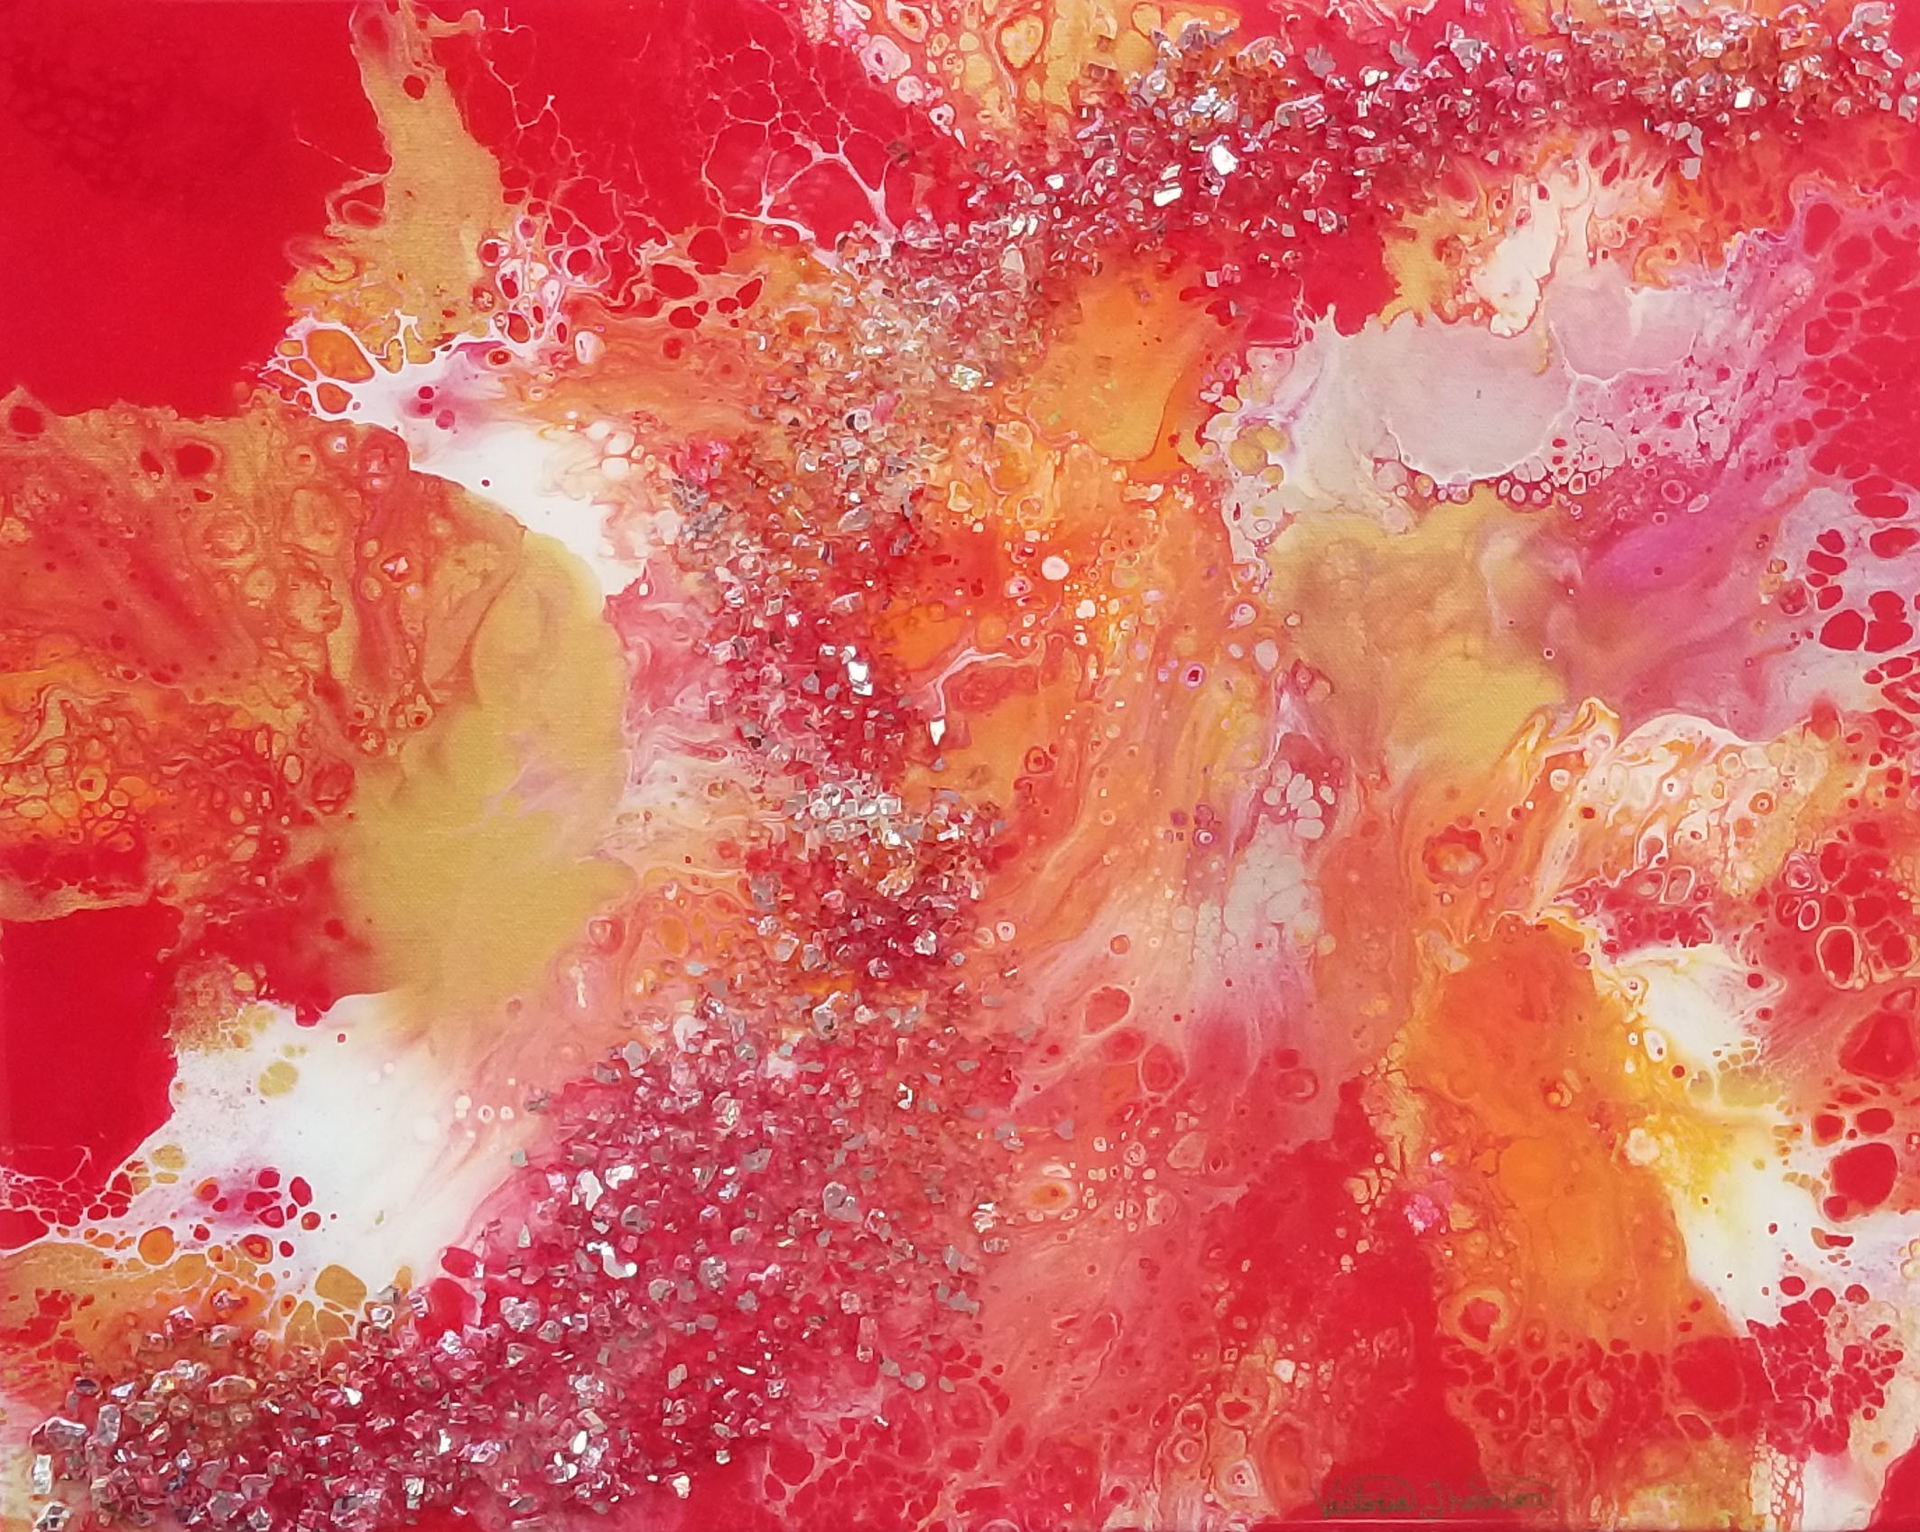 Spicy View - Fluid Acrylic/Resin on Canvas by Victoria Thornton